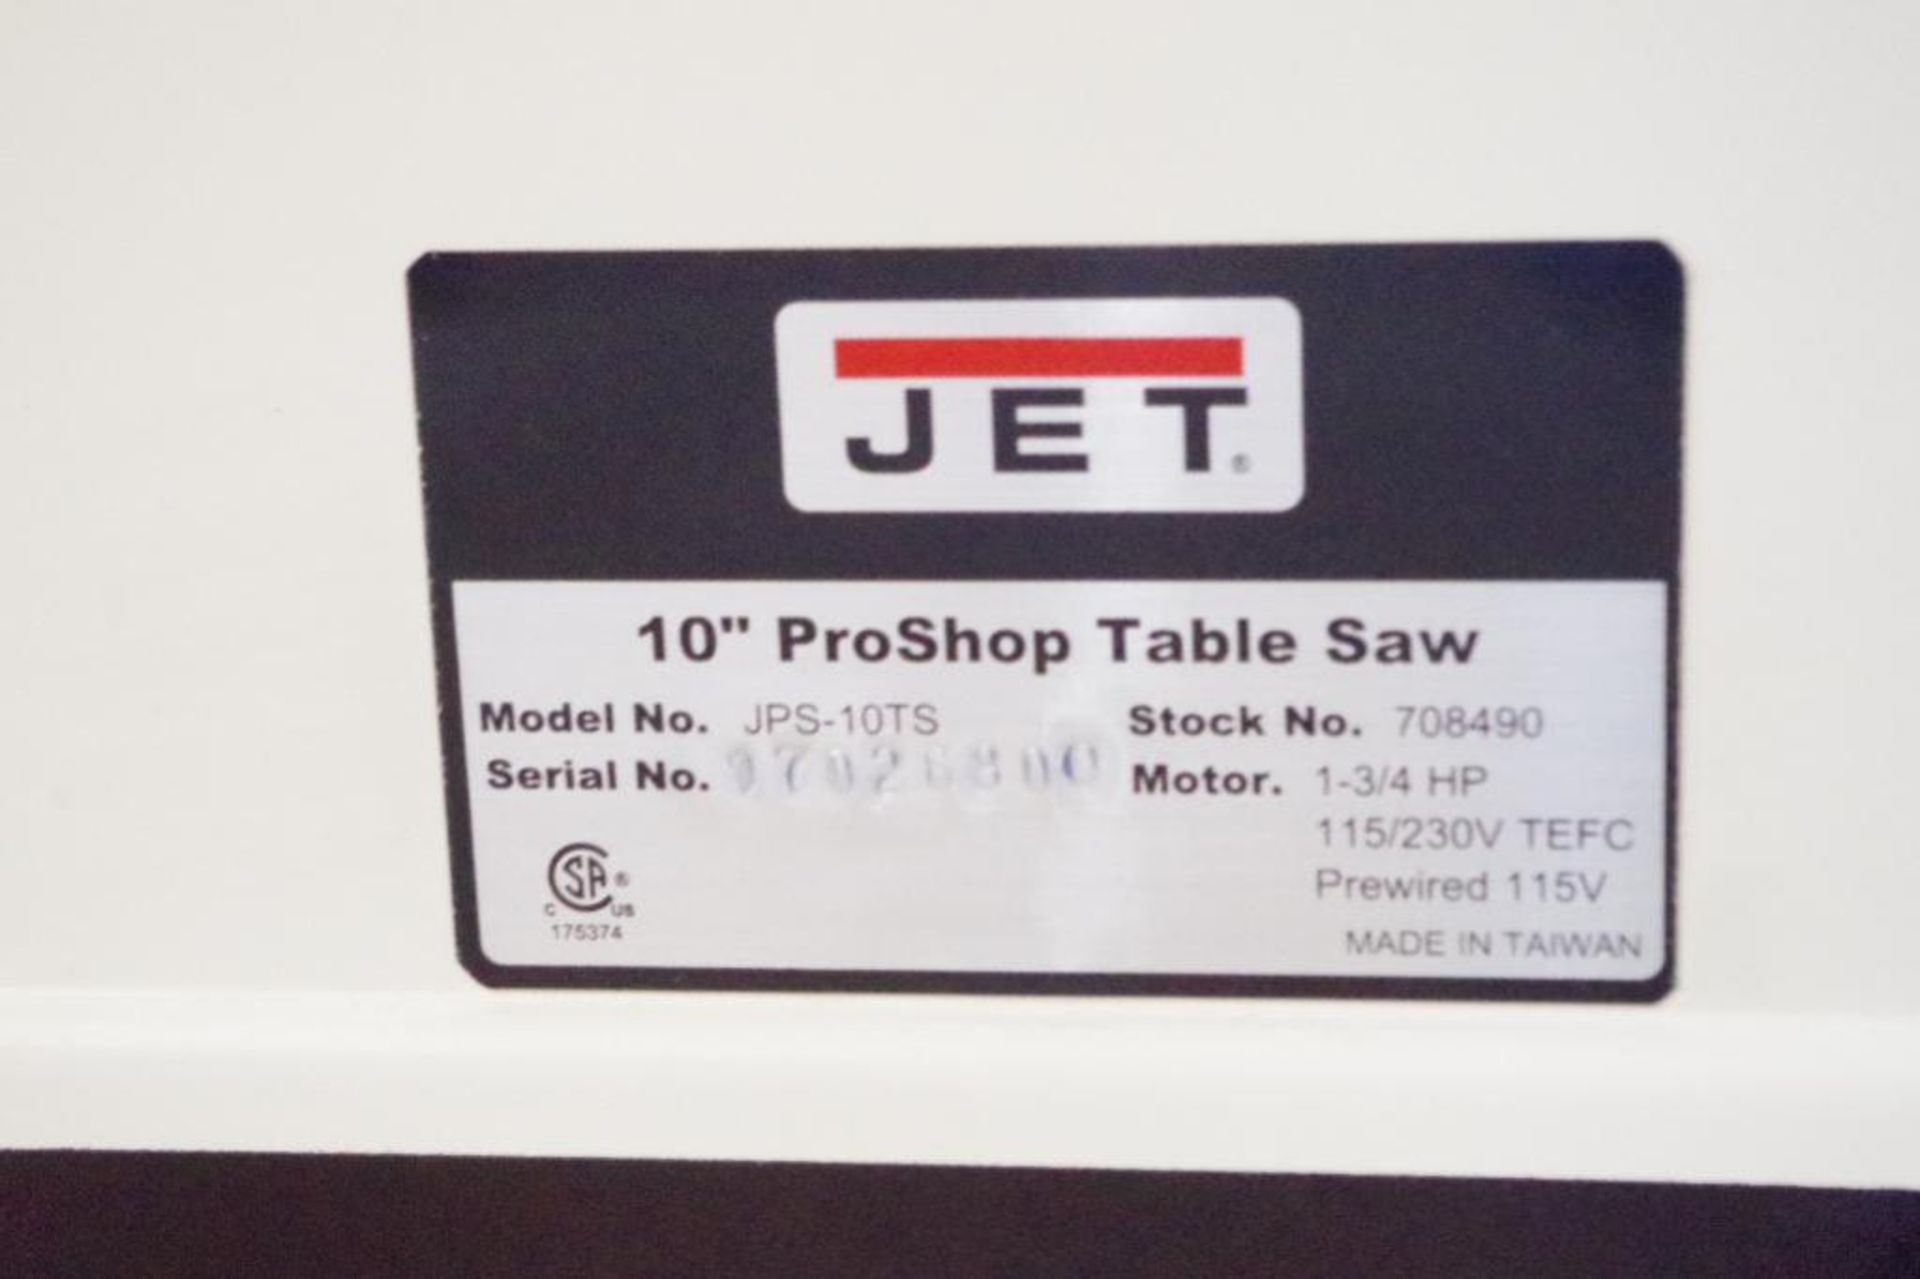 NEW JET 10" ProShop Table Saw w/ Extension Wings, Fence & Miter Gauge - Image 6 of 6